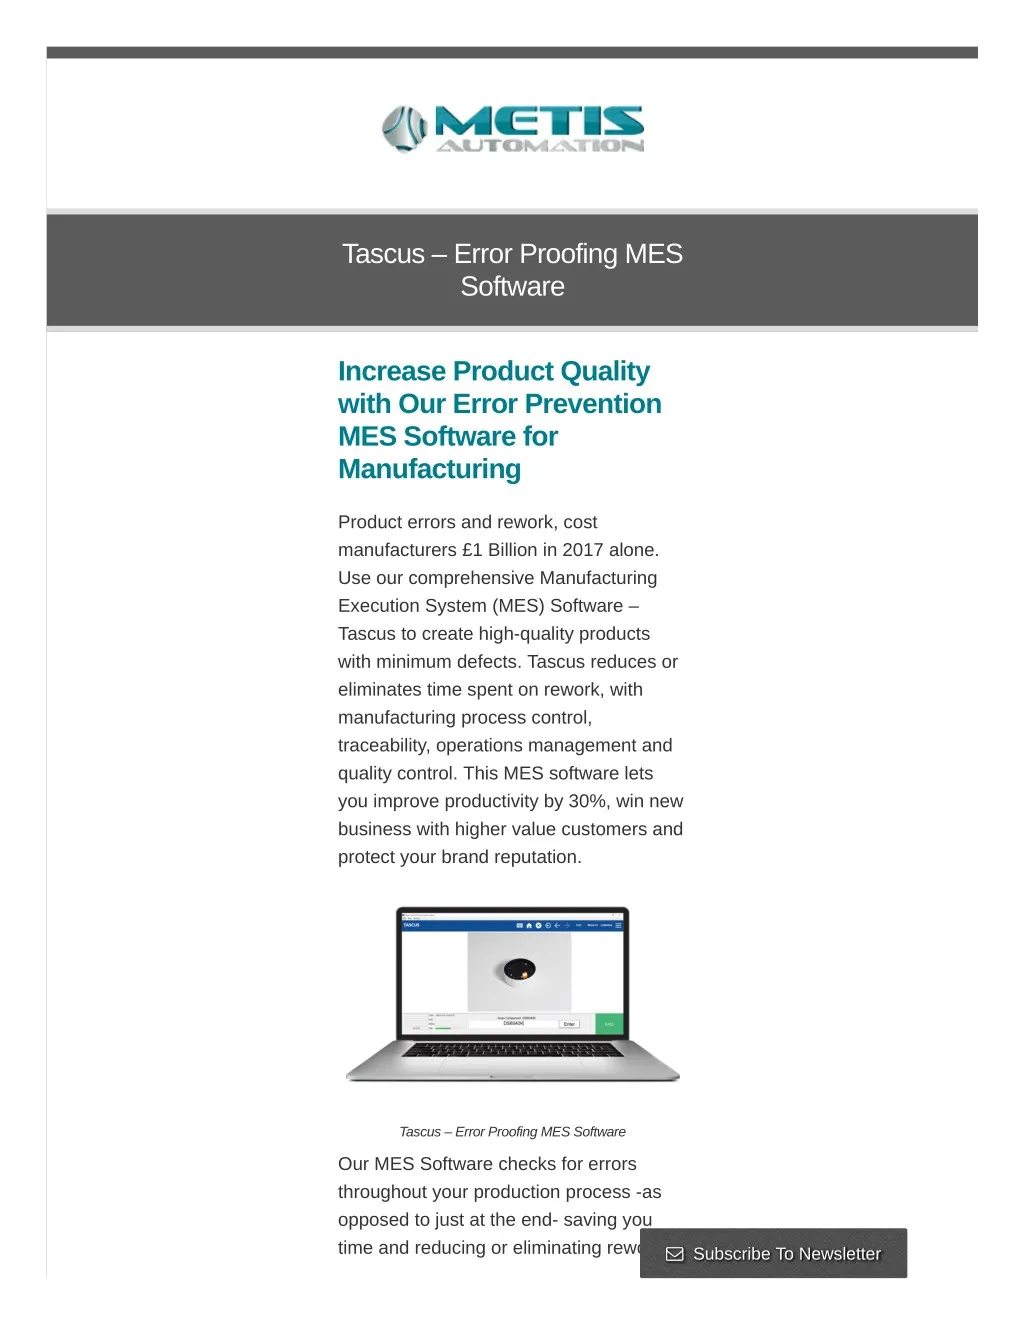 tascus error proofing mes software